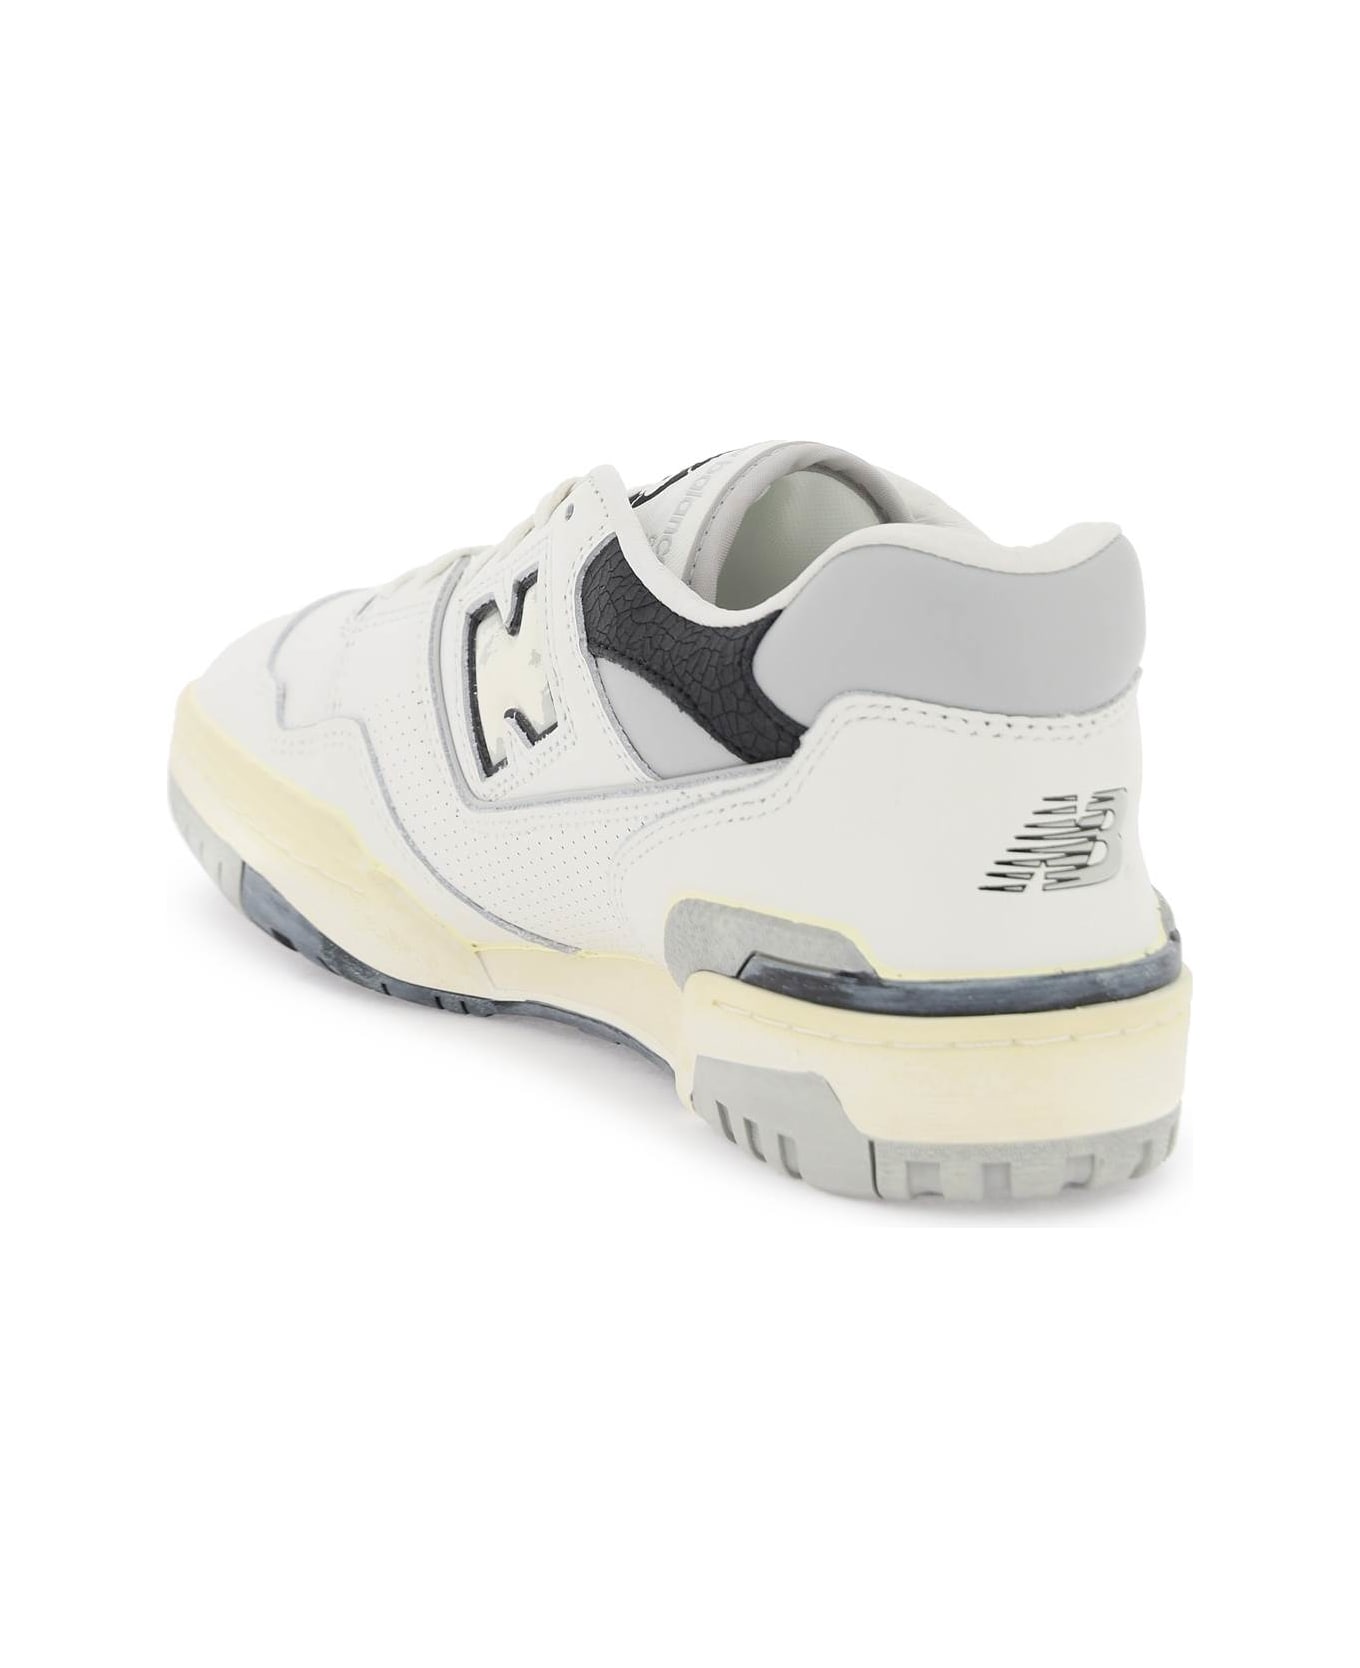 New Balance Vintage-effect 550 Sneakers - OFF WHITE GREY (White) スニーカー